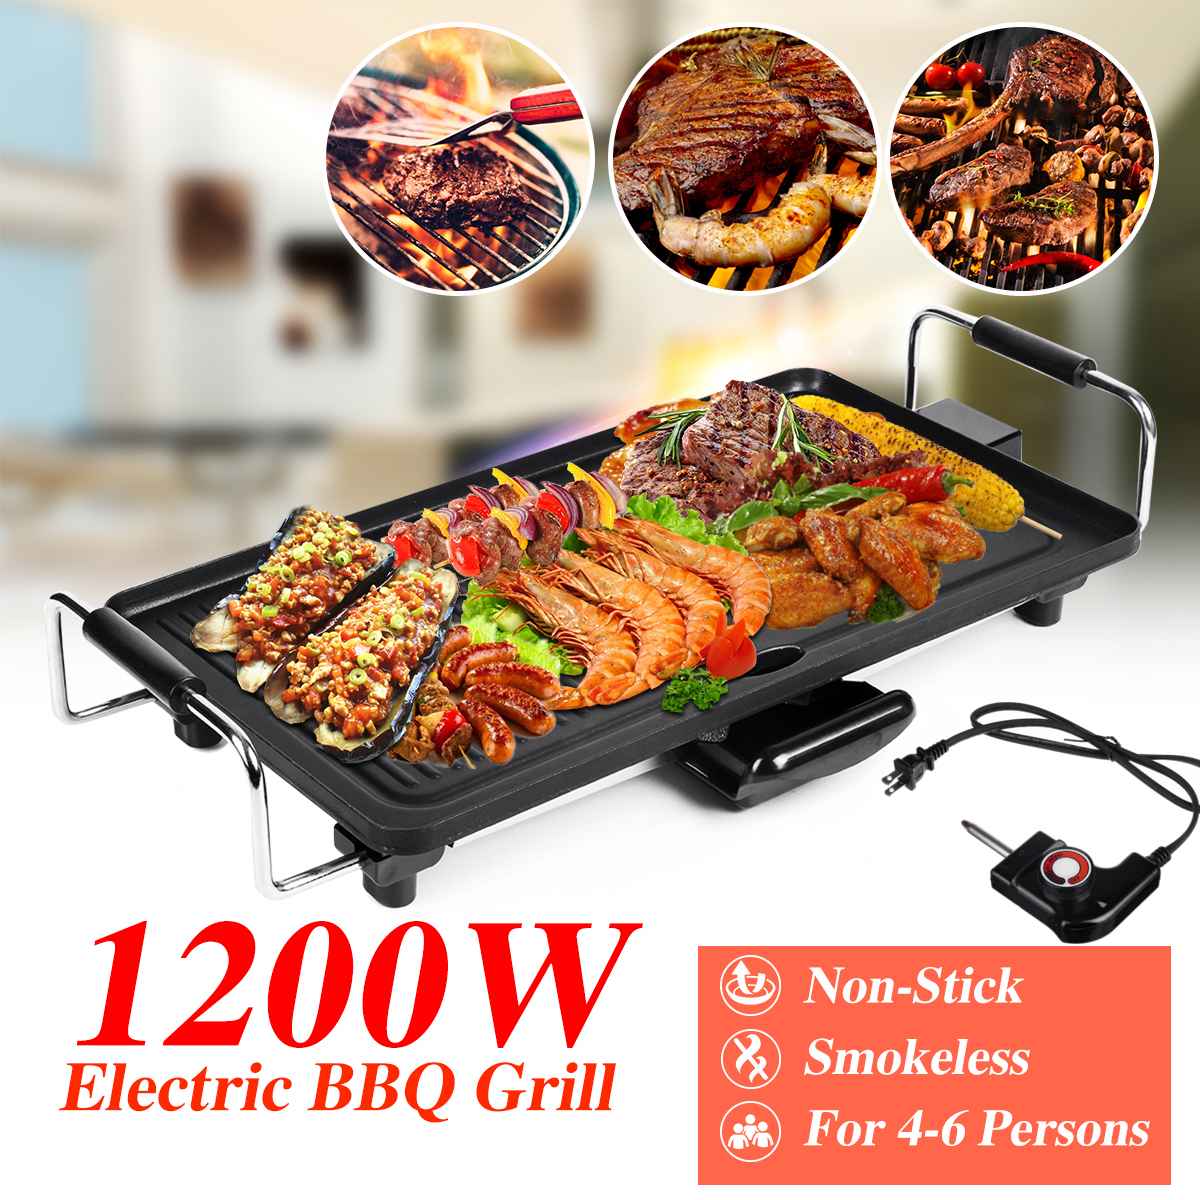 Non-Stick Electric Smokeless Indoor Grill